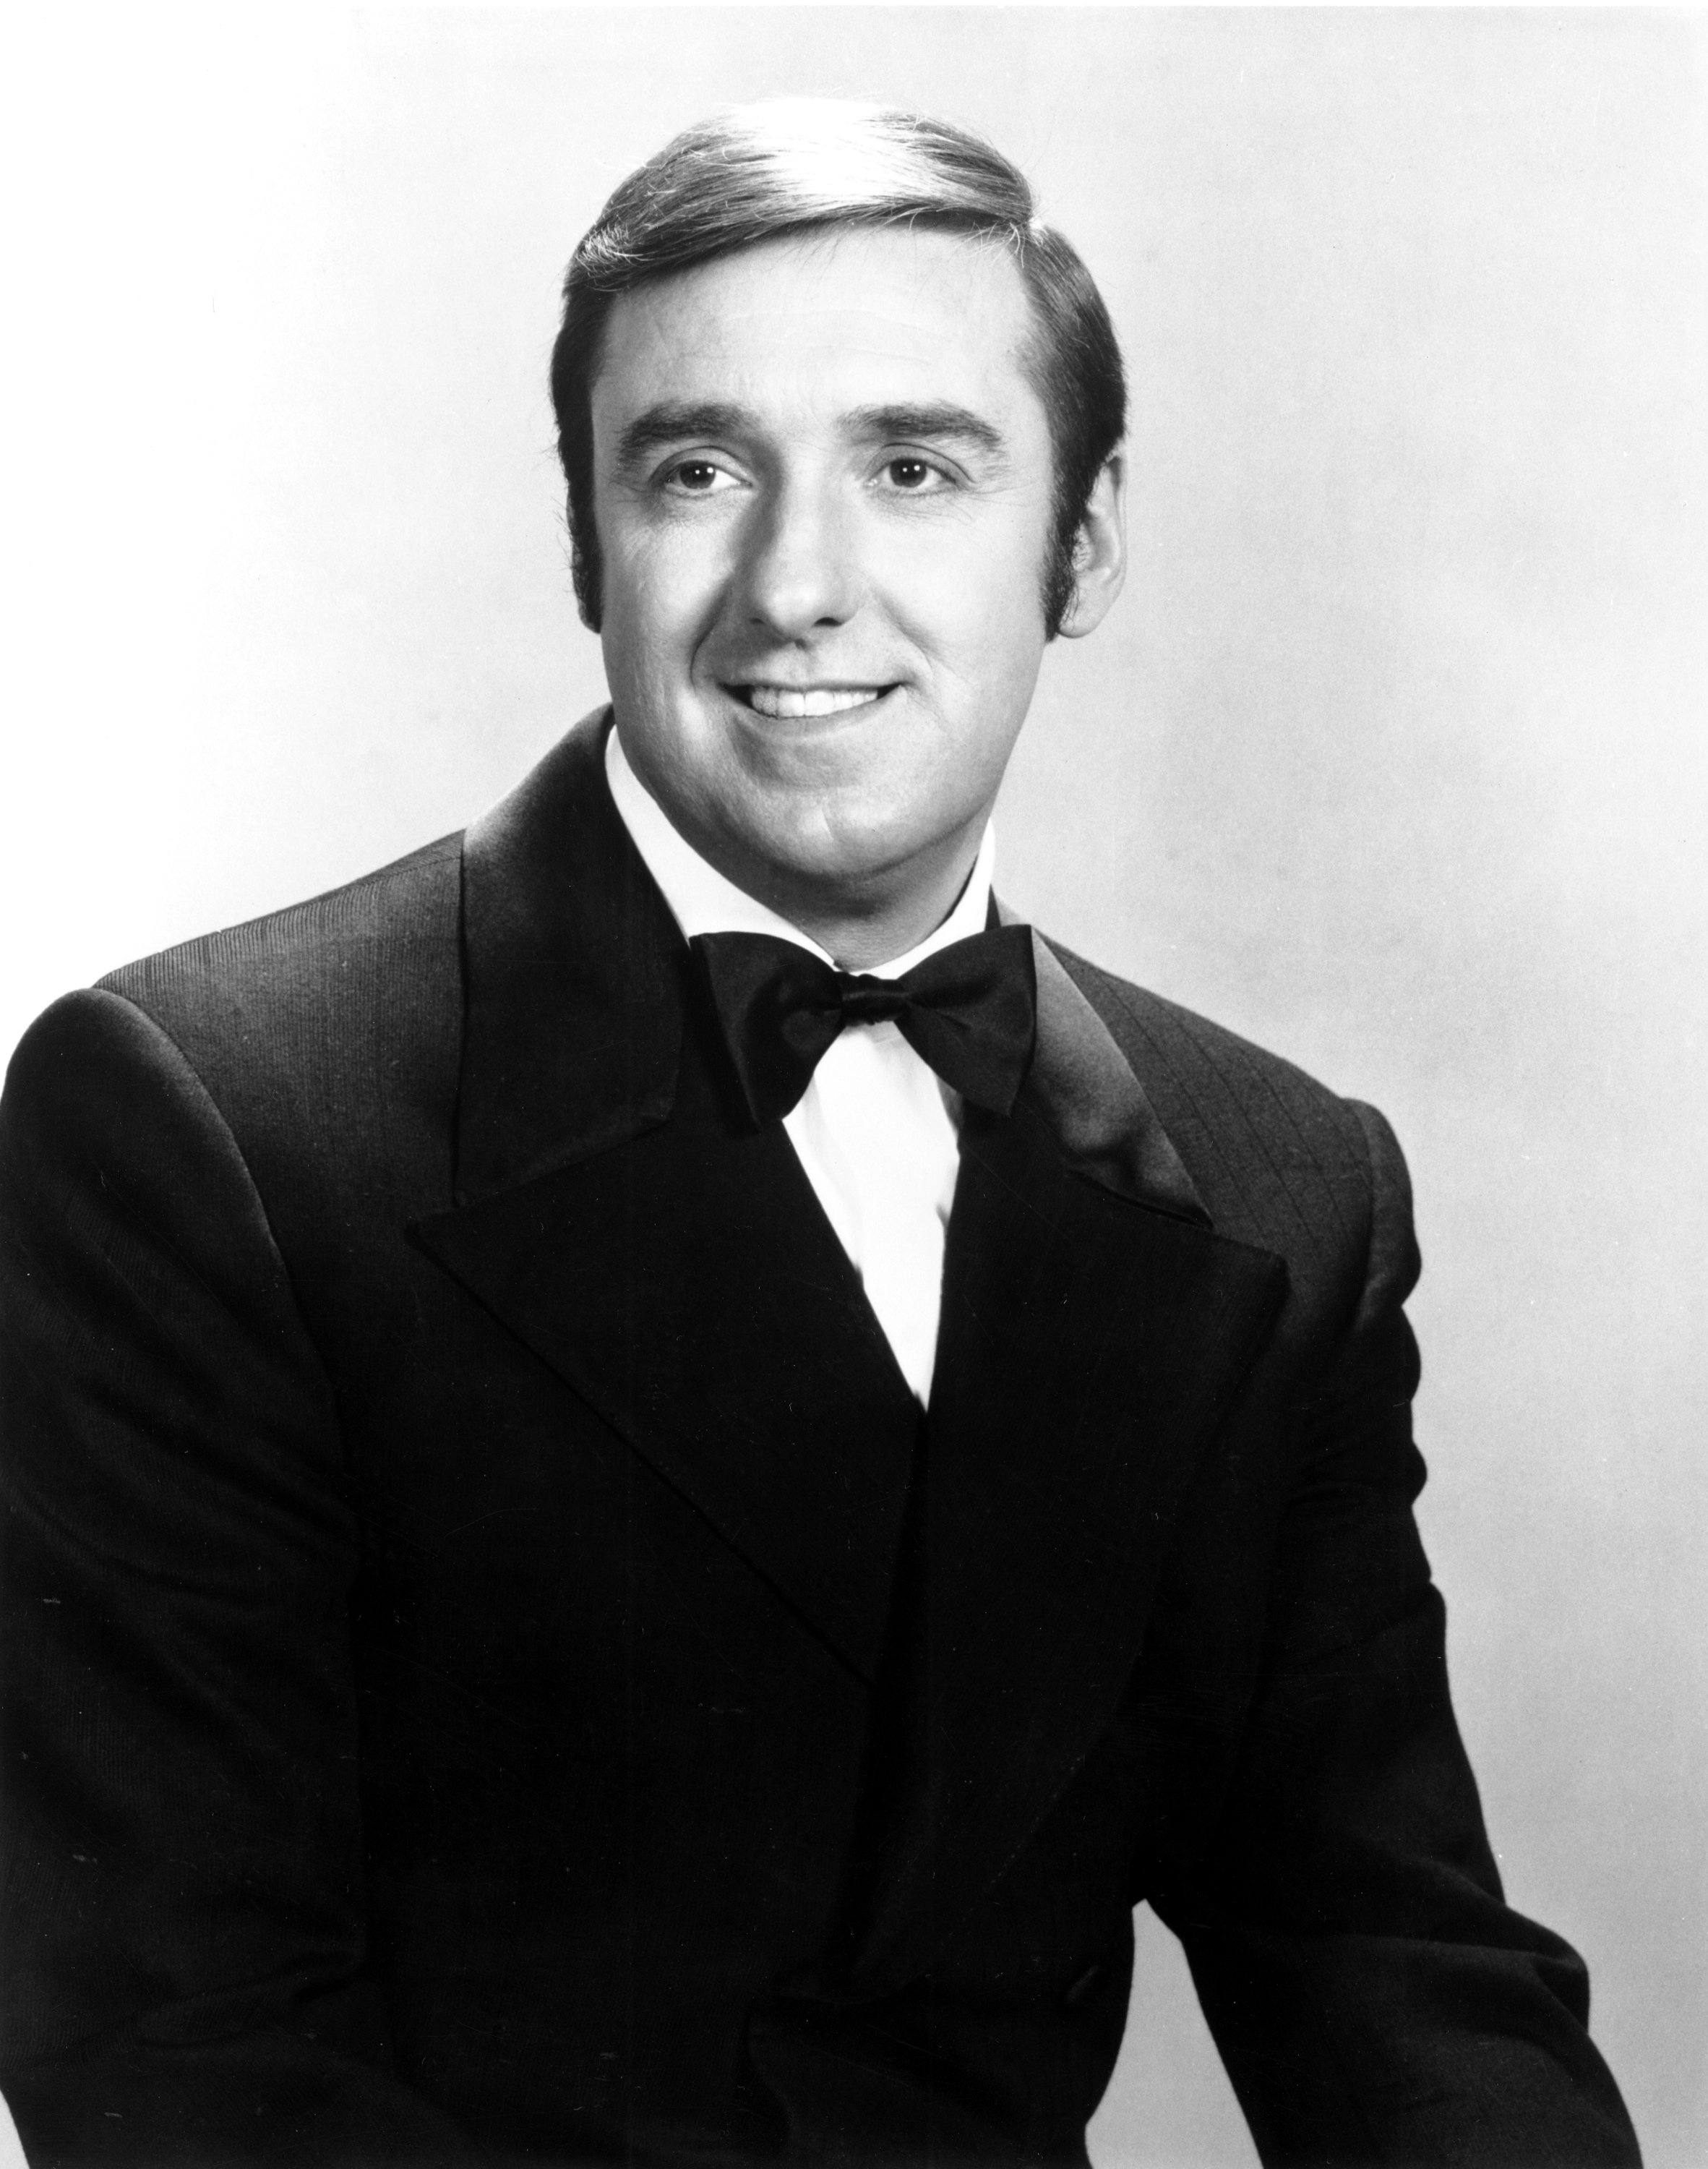 Jim Nabors pictured smiling while posing in a black tuxedo. | Source: Getty Images